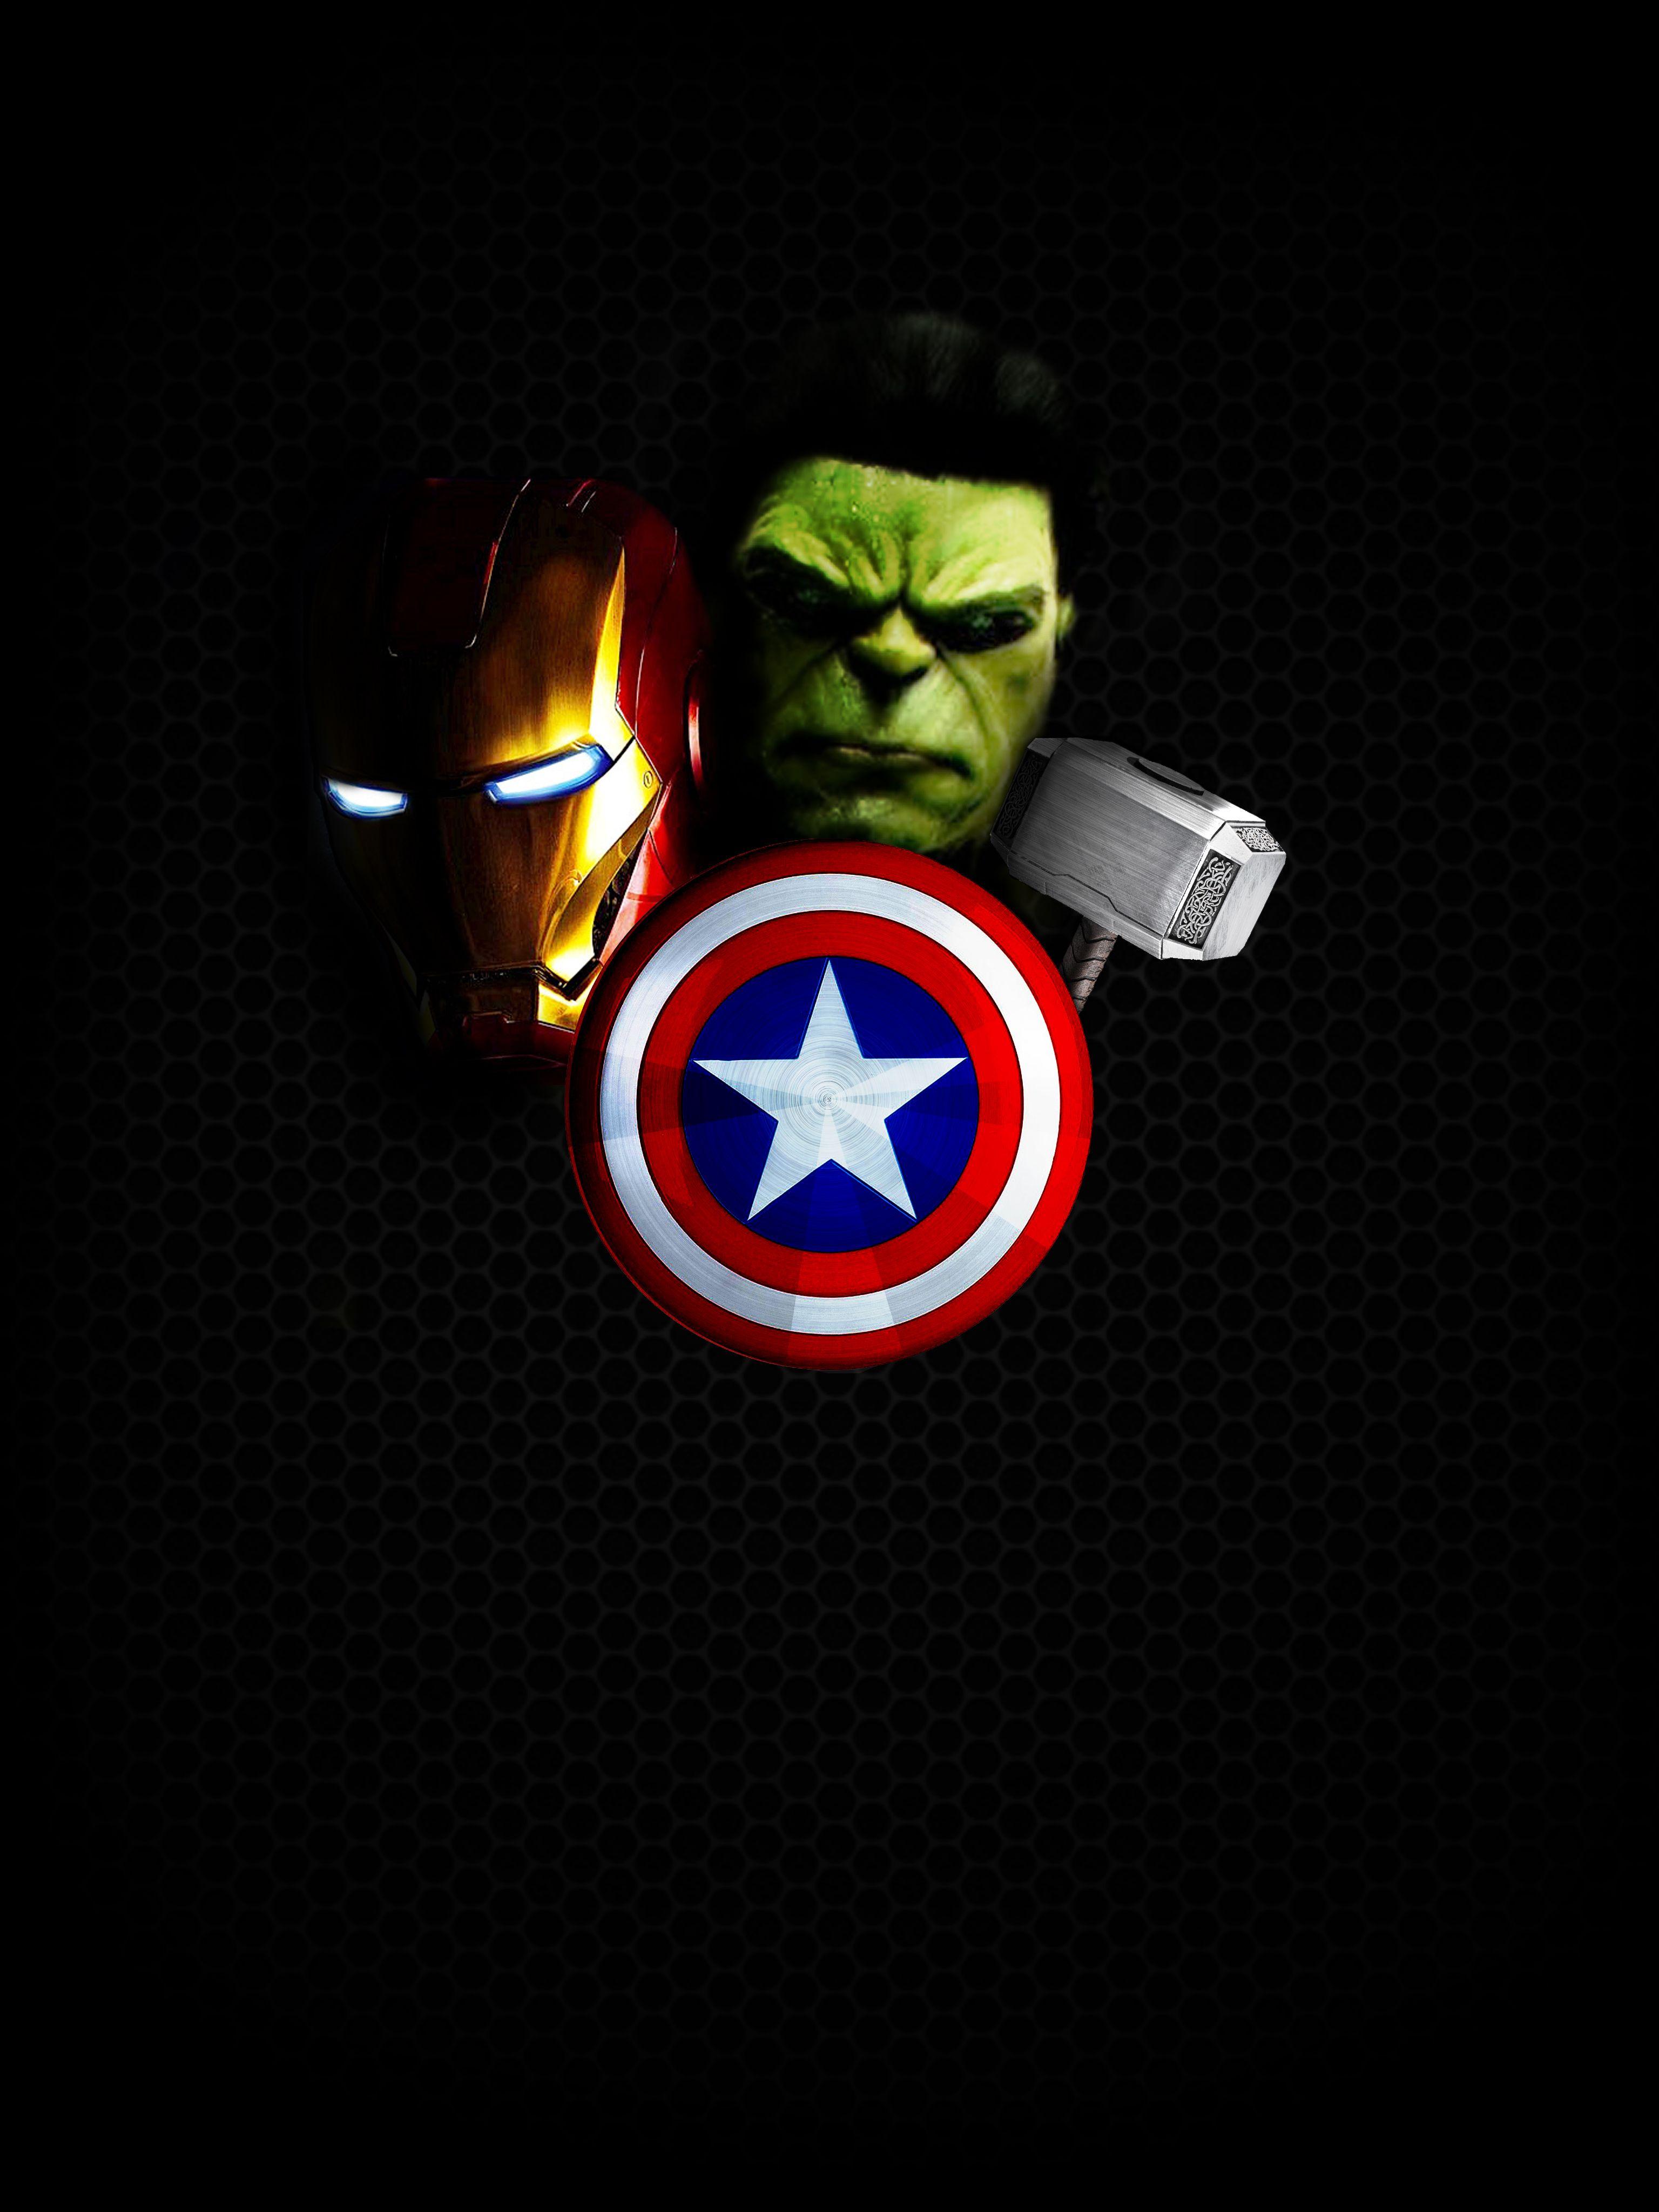 Avengers___hd_ipad_iphone_android_wallpaper_by_shikhar01 D57k223